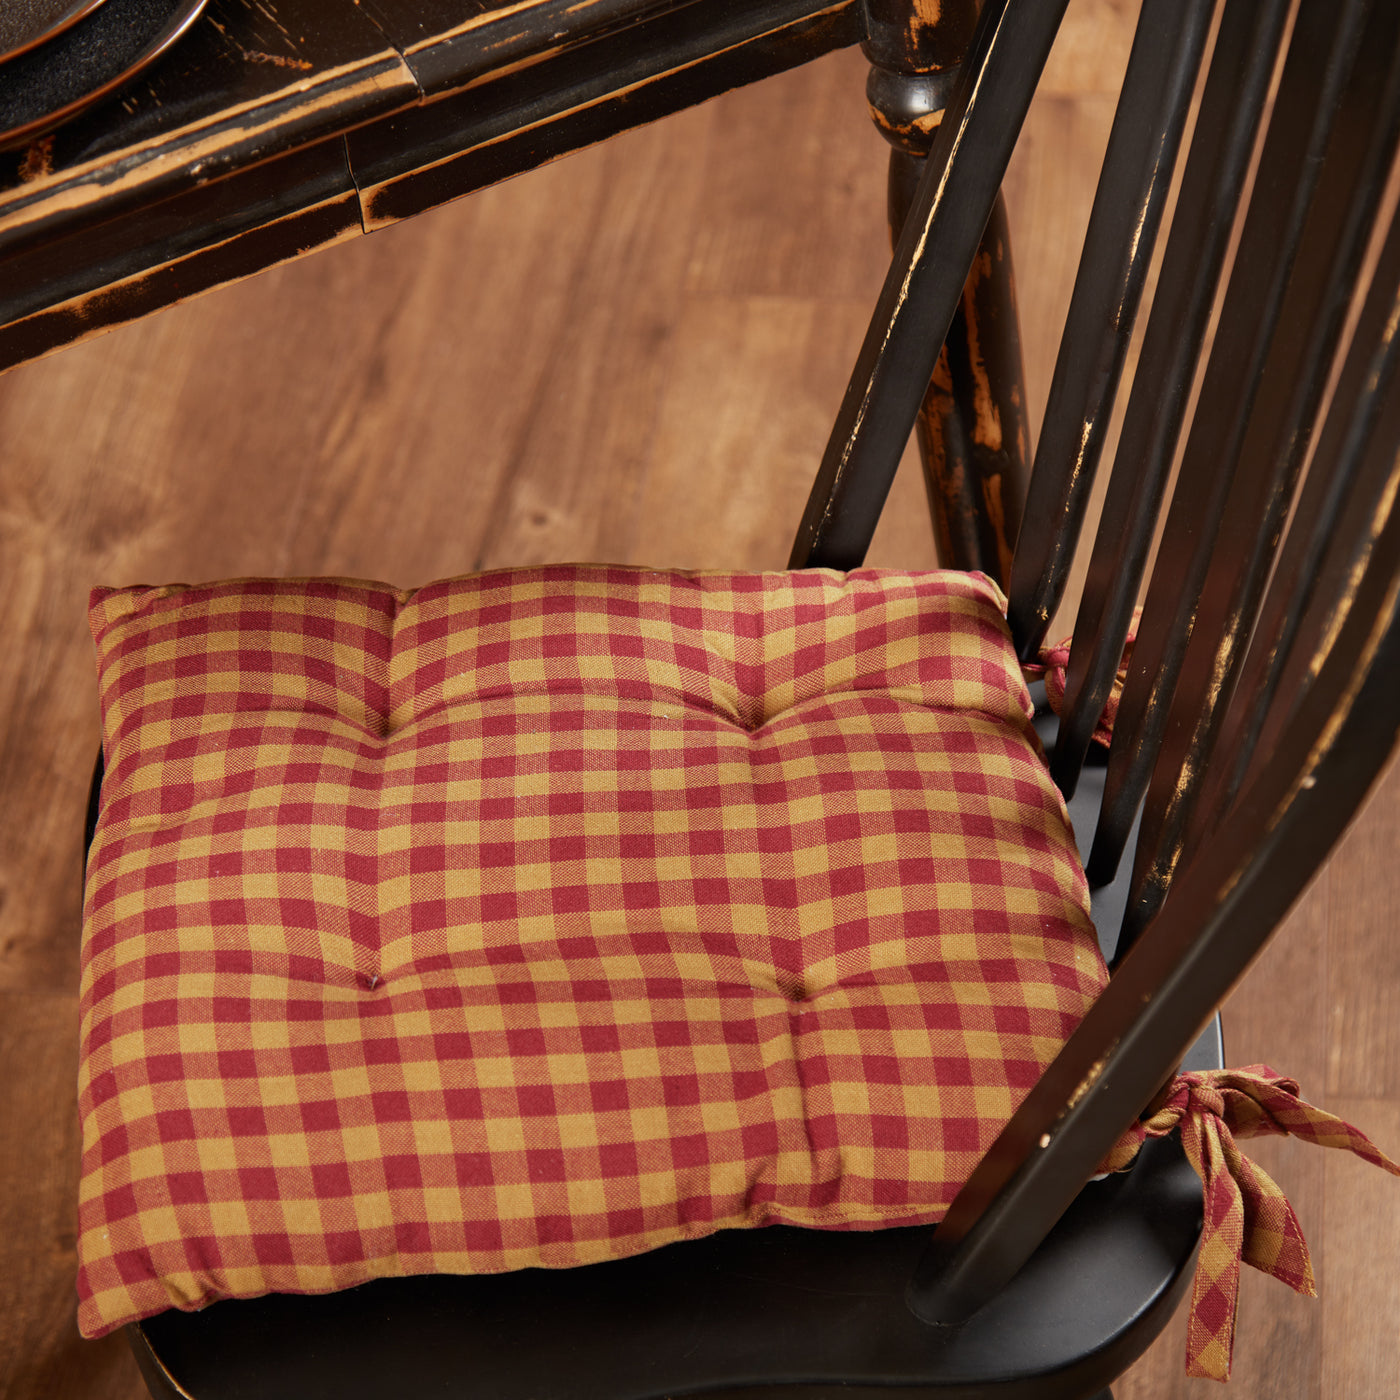 Burgundy And Tan Check Chair Pad With Tie Ons